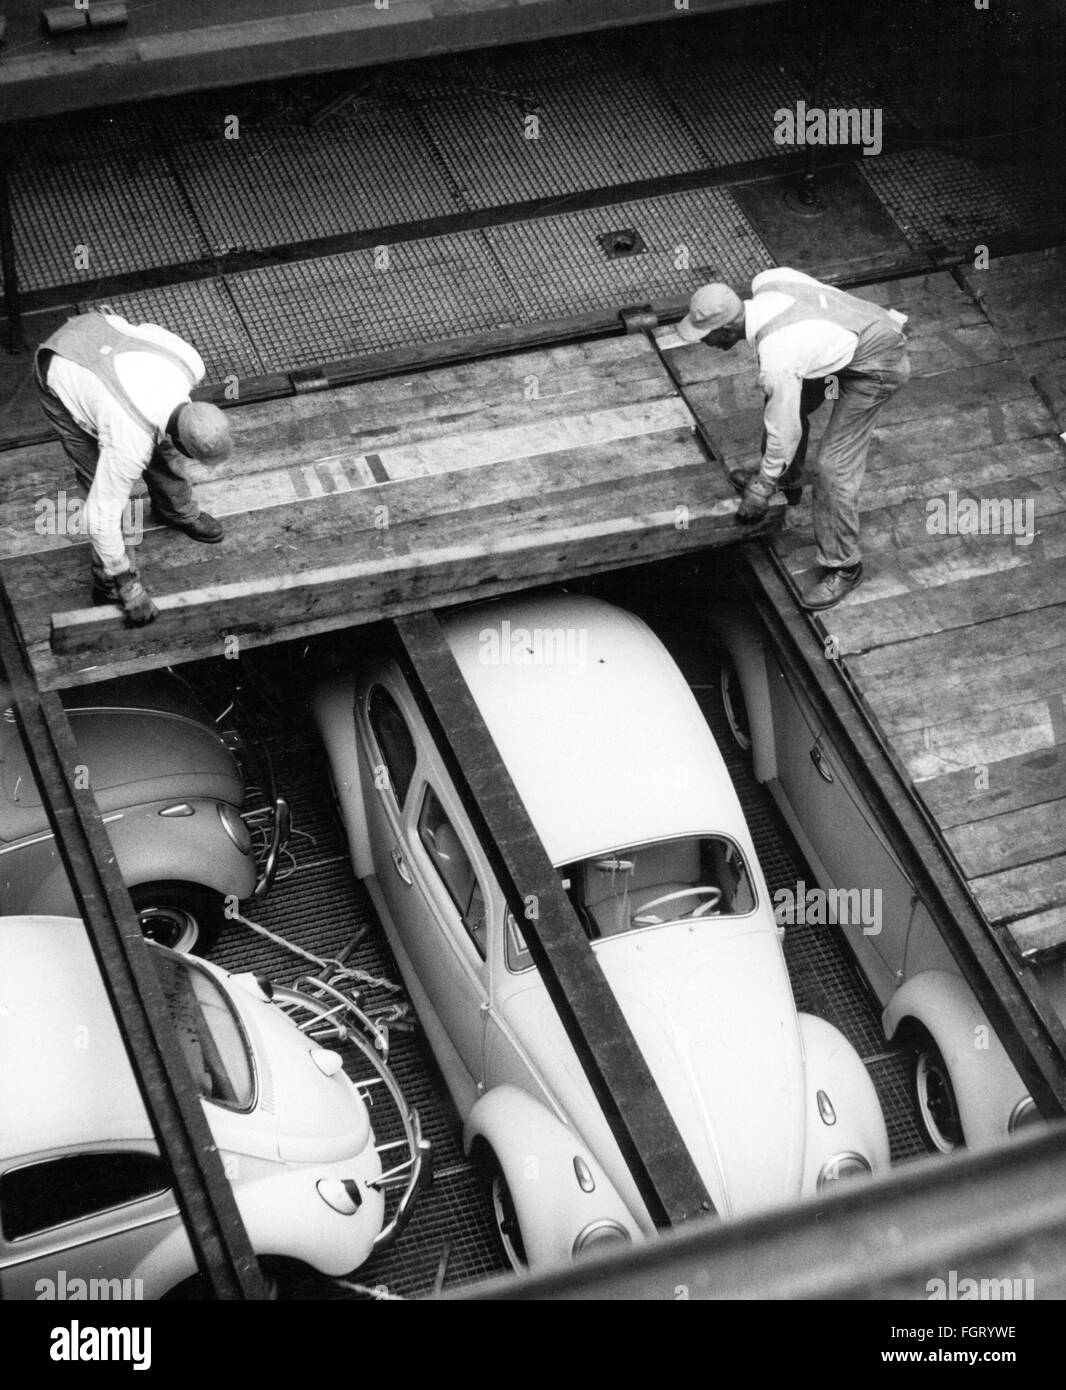 transport / transportation, navigation, ships, cargo ship, cargo compartment with VW Beetles, Houston, Texas, 1960s, Additional-Rights-Clearences-Not Available Stock Photo